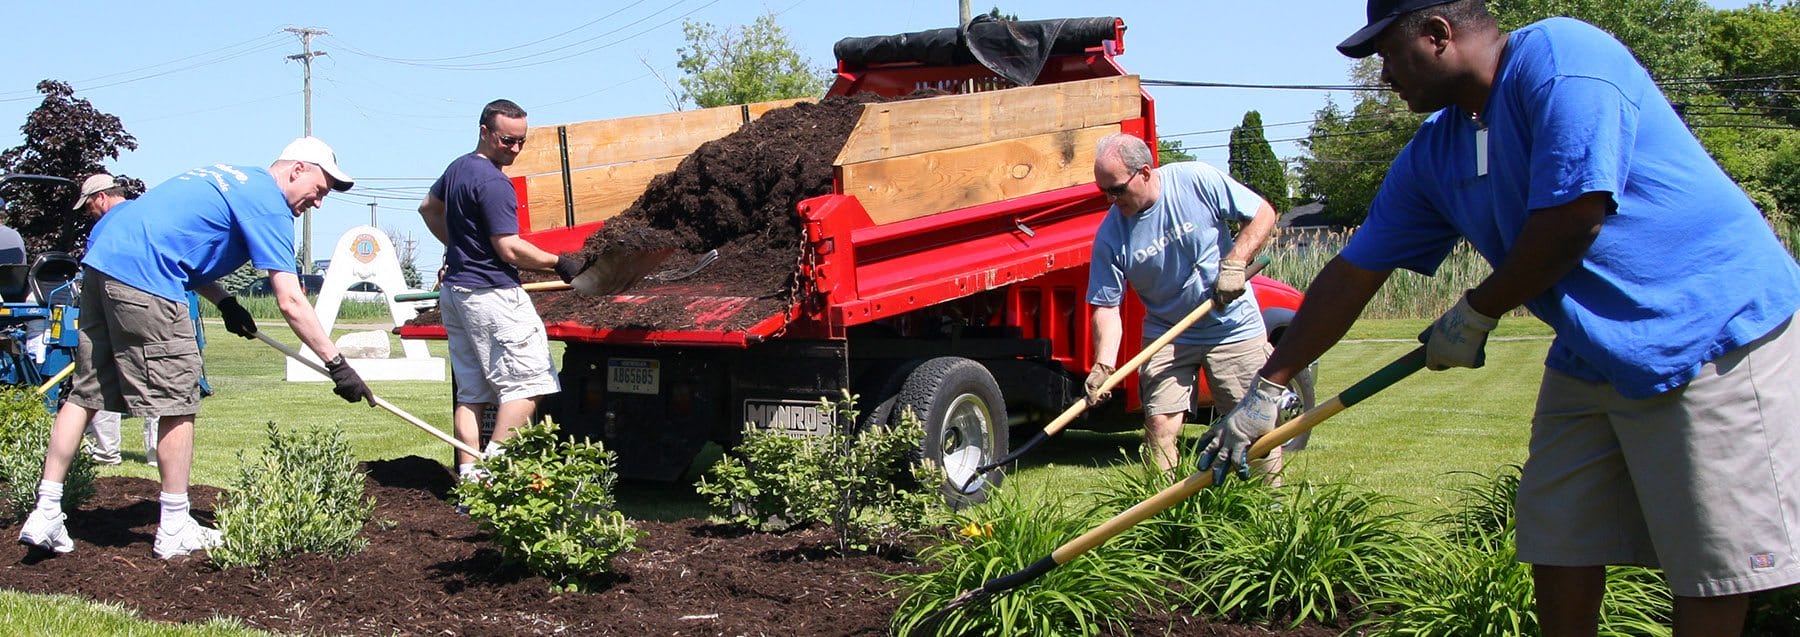 Four men, each with a rake or shovel, stand outdoors by a truck dumping soil onto a garden bed. The men are spreading the soil around